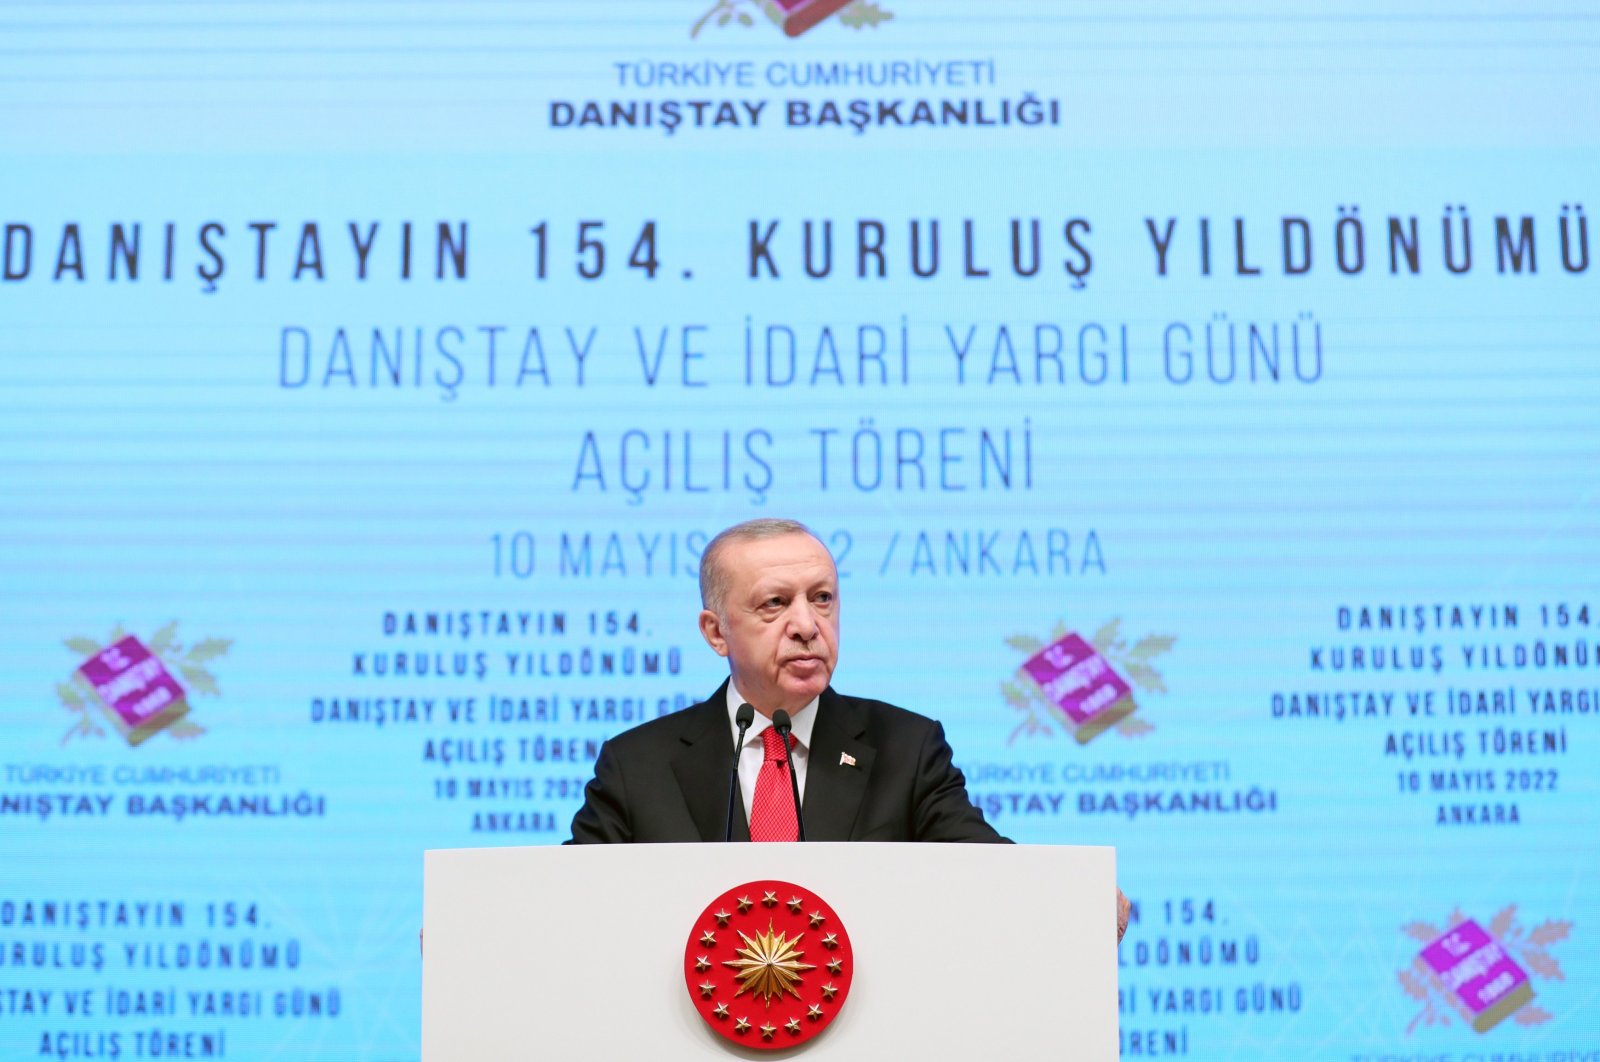 President Recep Tayyip Erdoğan speaks at a ceremony to mark the 154th anniversary of Turkey&#039;s top administrative court in Ankara, Turkey, May 10, 2022. (DHA Photo)